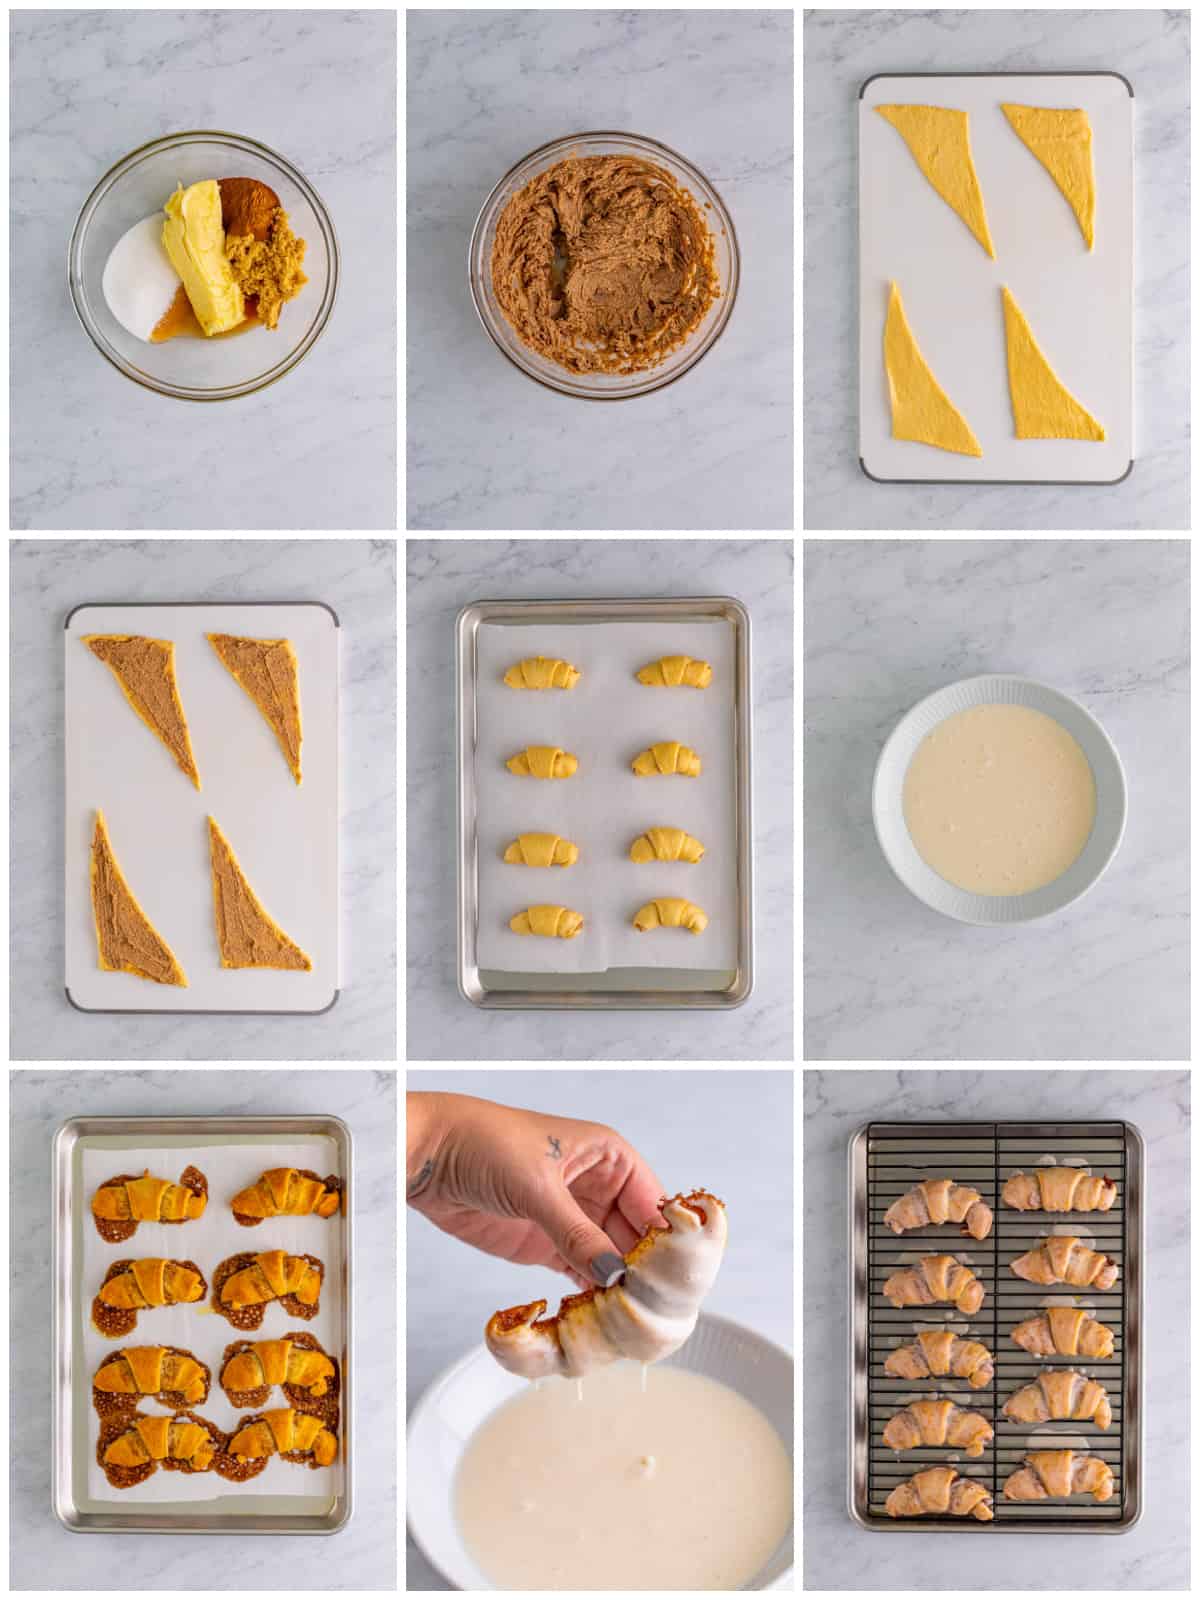 Step by step photos on how to make Cinnamon Crescent Rolls.